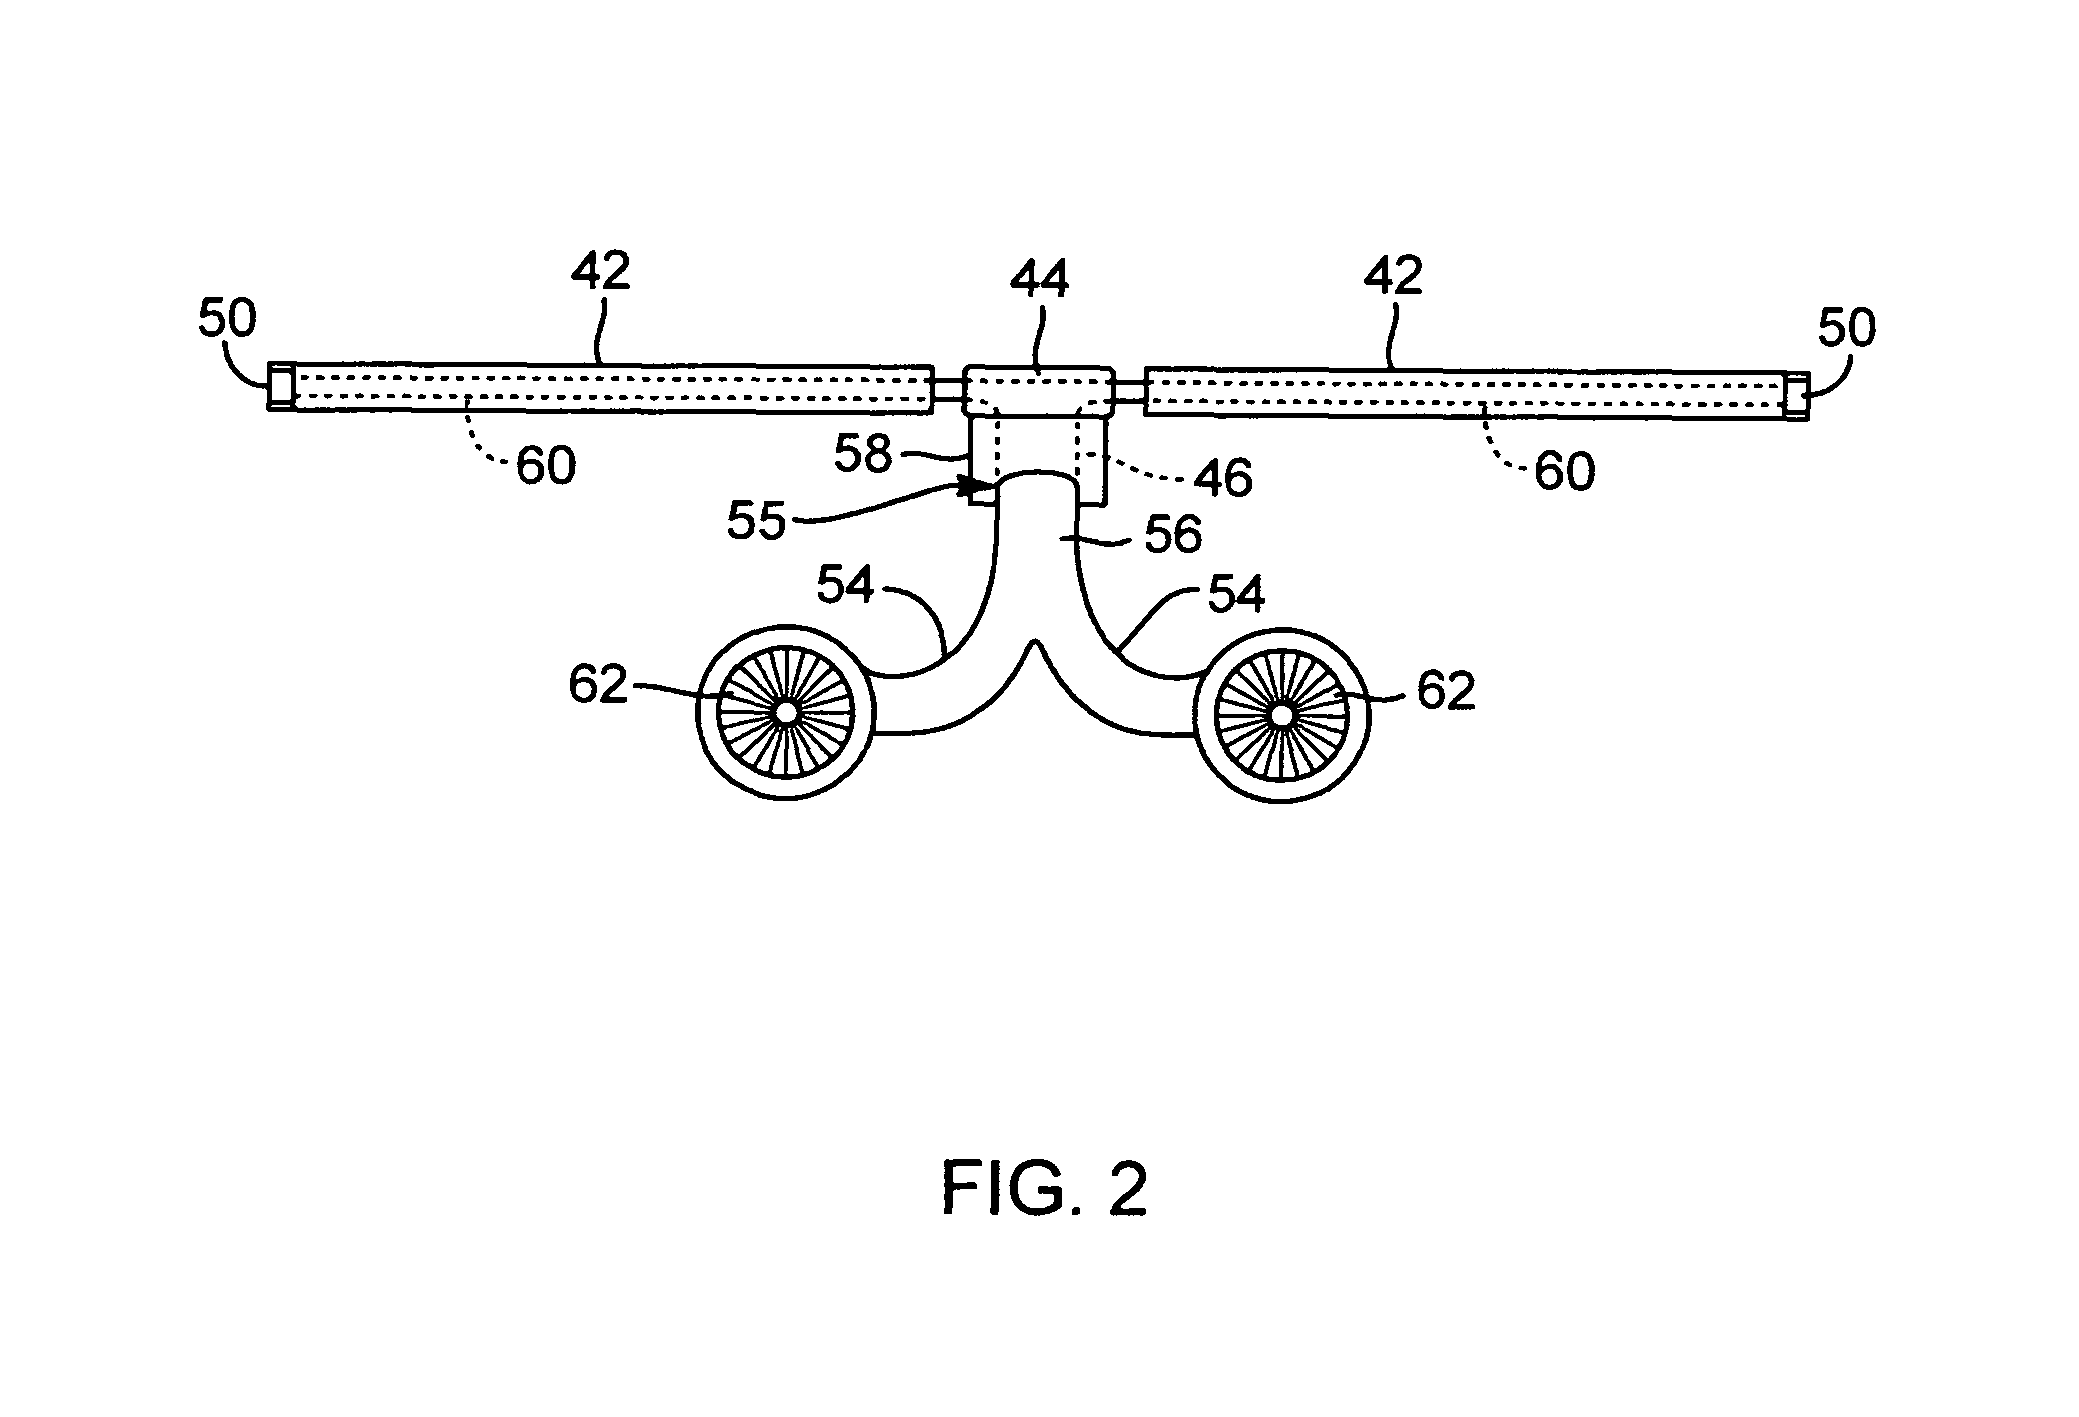 Rotor-mast-tilting apparatus and method for optimized crossing of natural frequencies